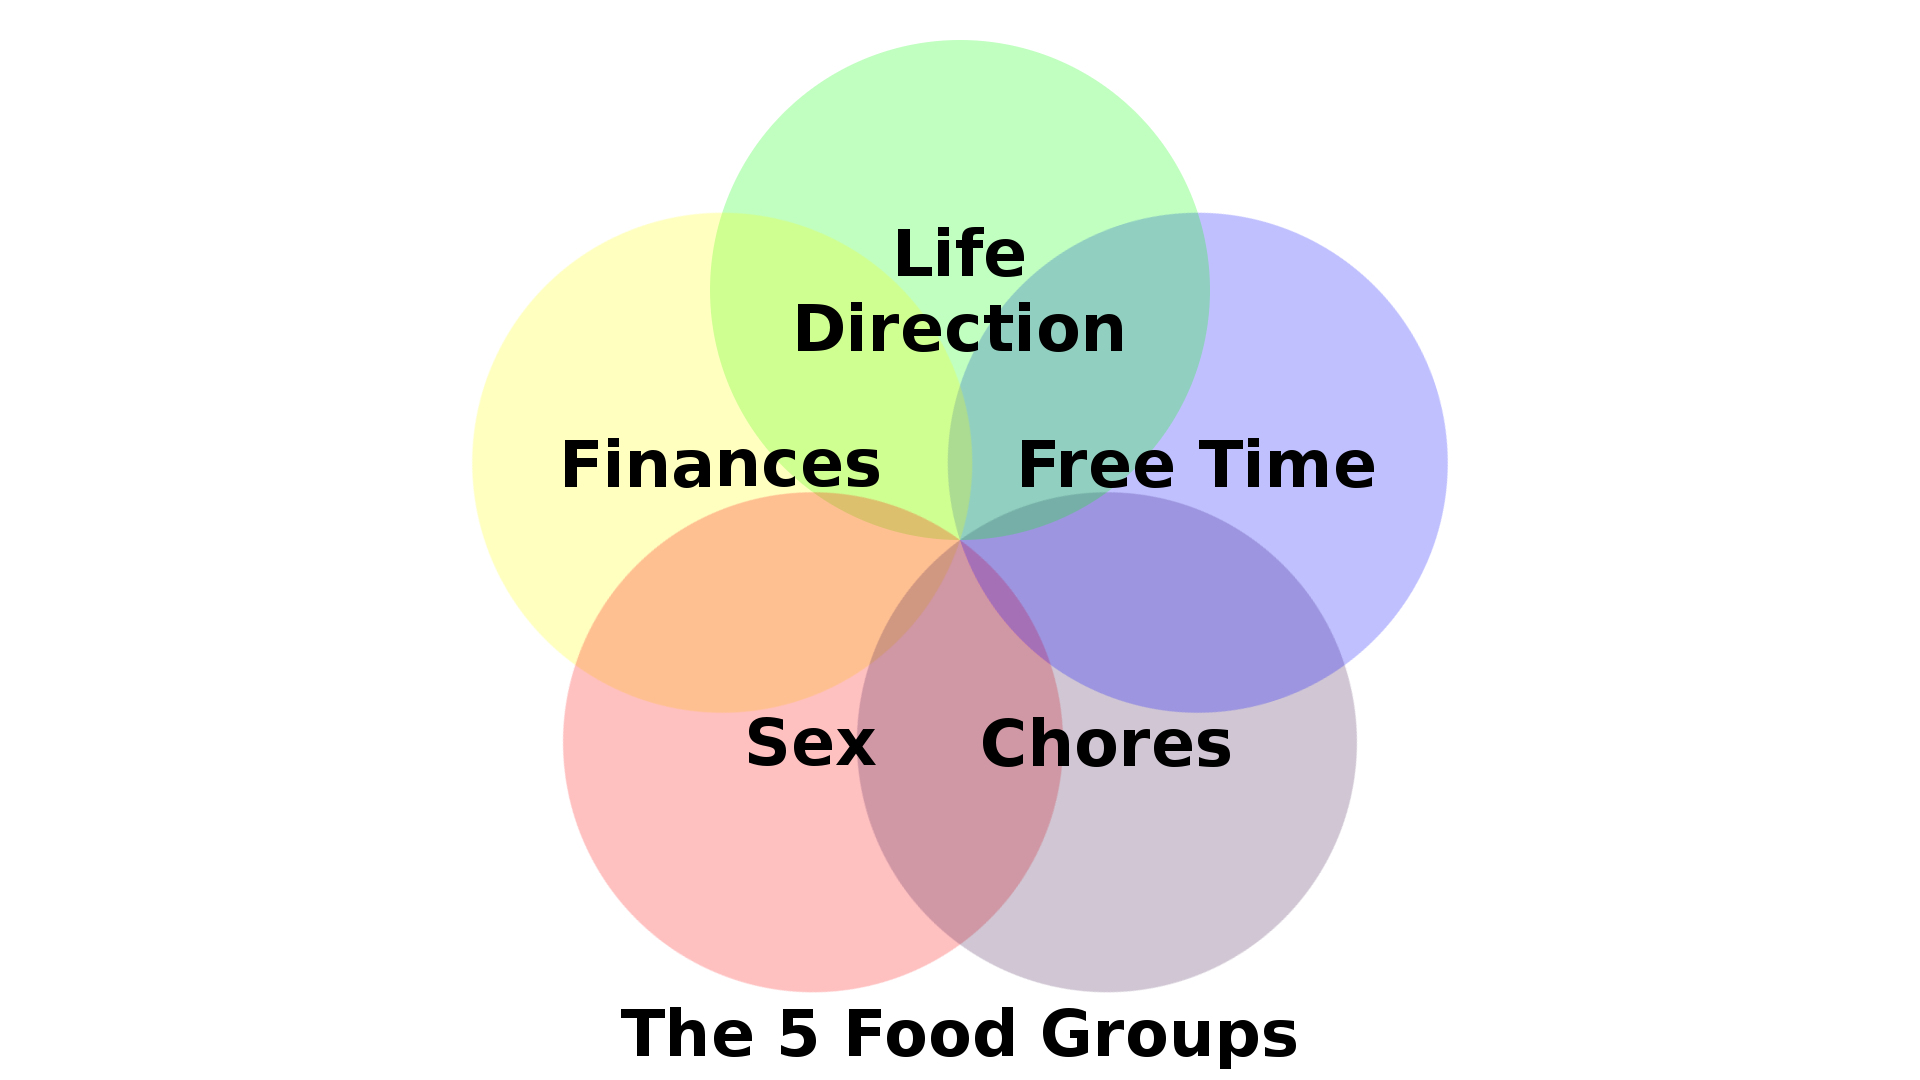 The 5 Food Groups